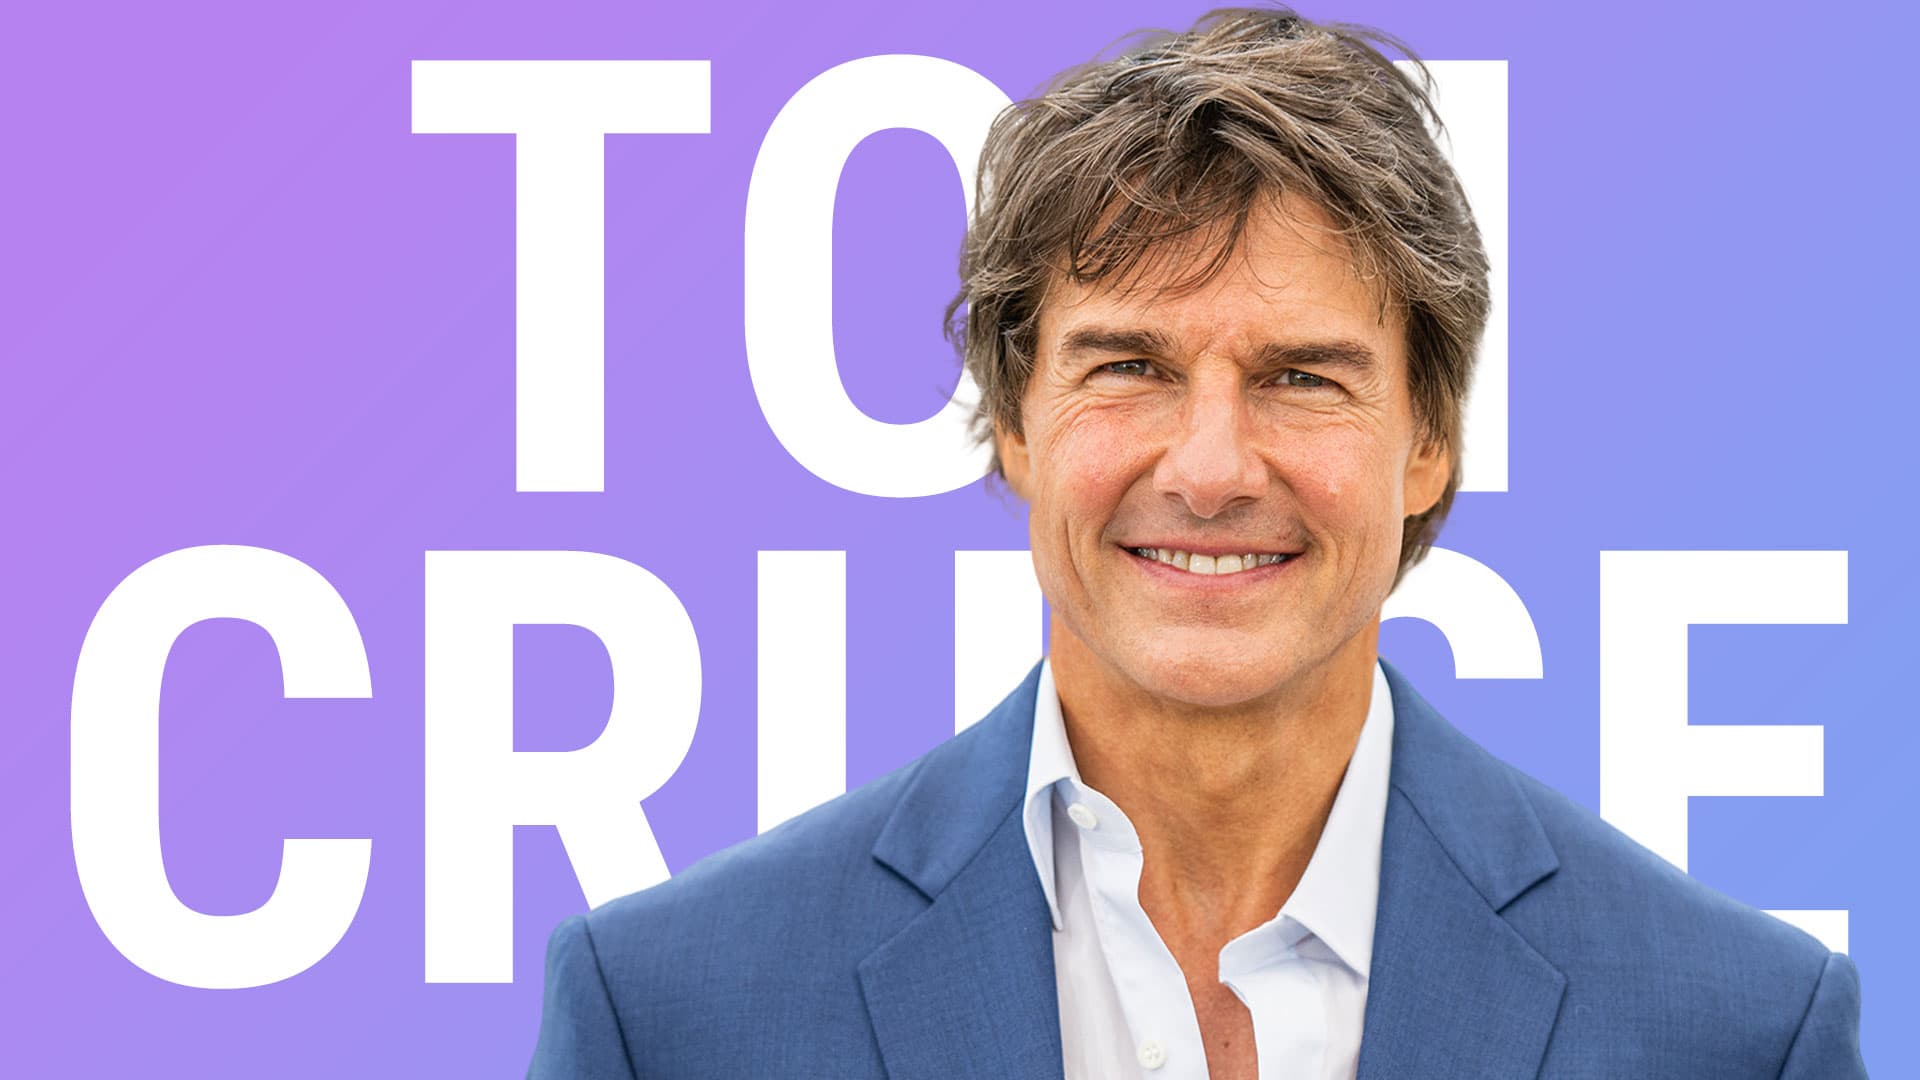 Is Tom Cruise Leaving Scientology or Just a Speculation?